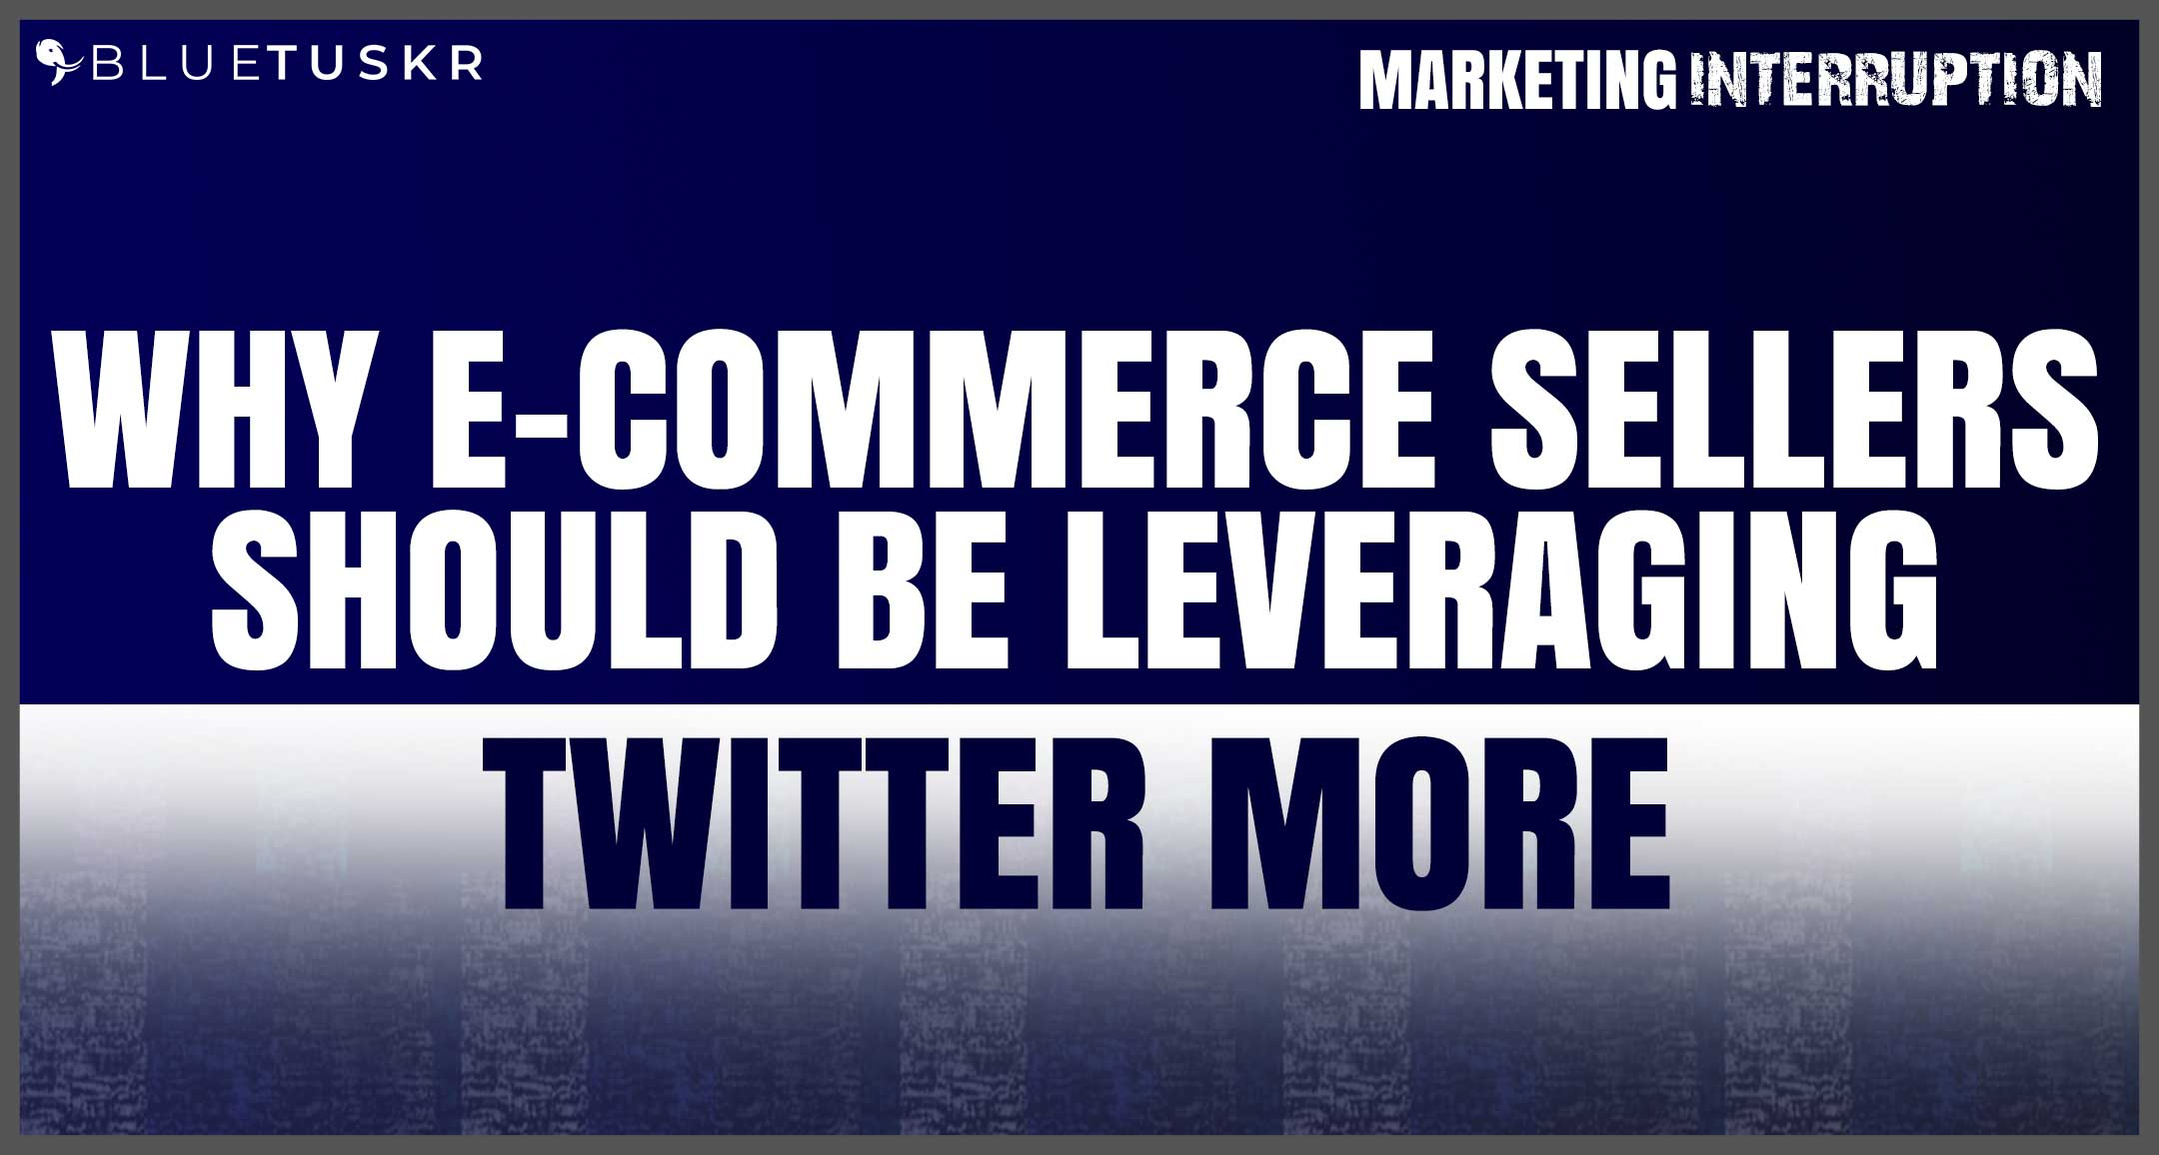 Why E-commerce Sellers Should Be Leveraging Twitter More